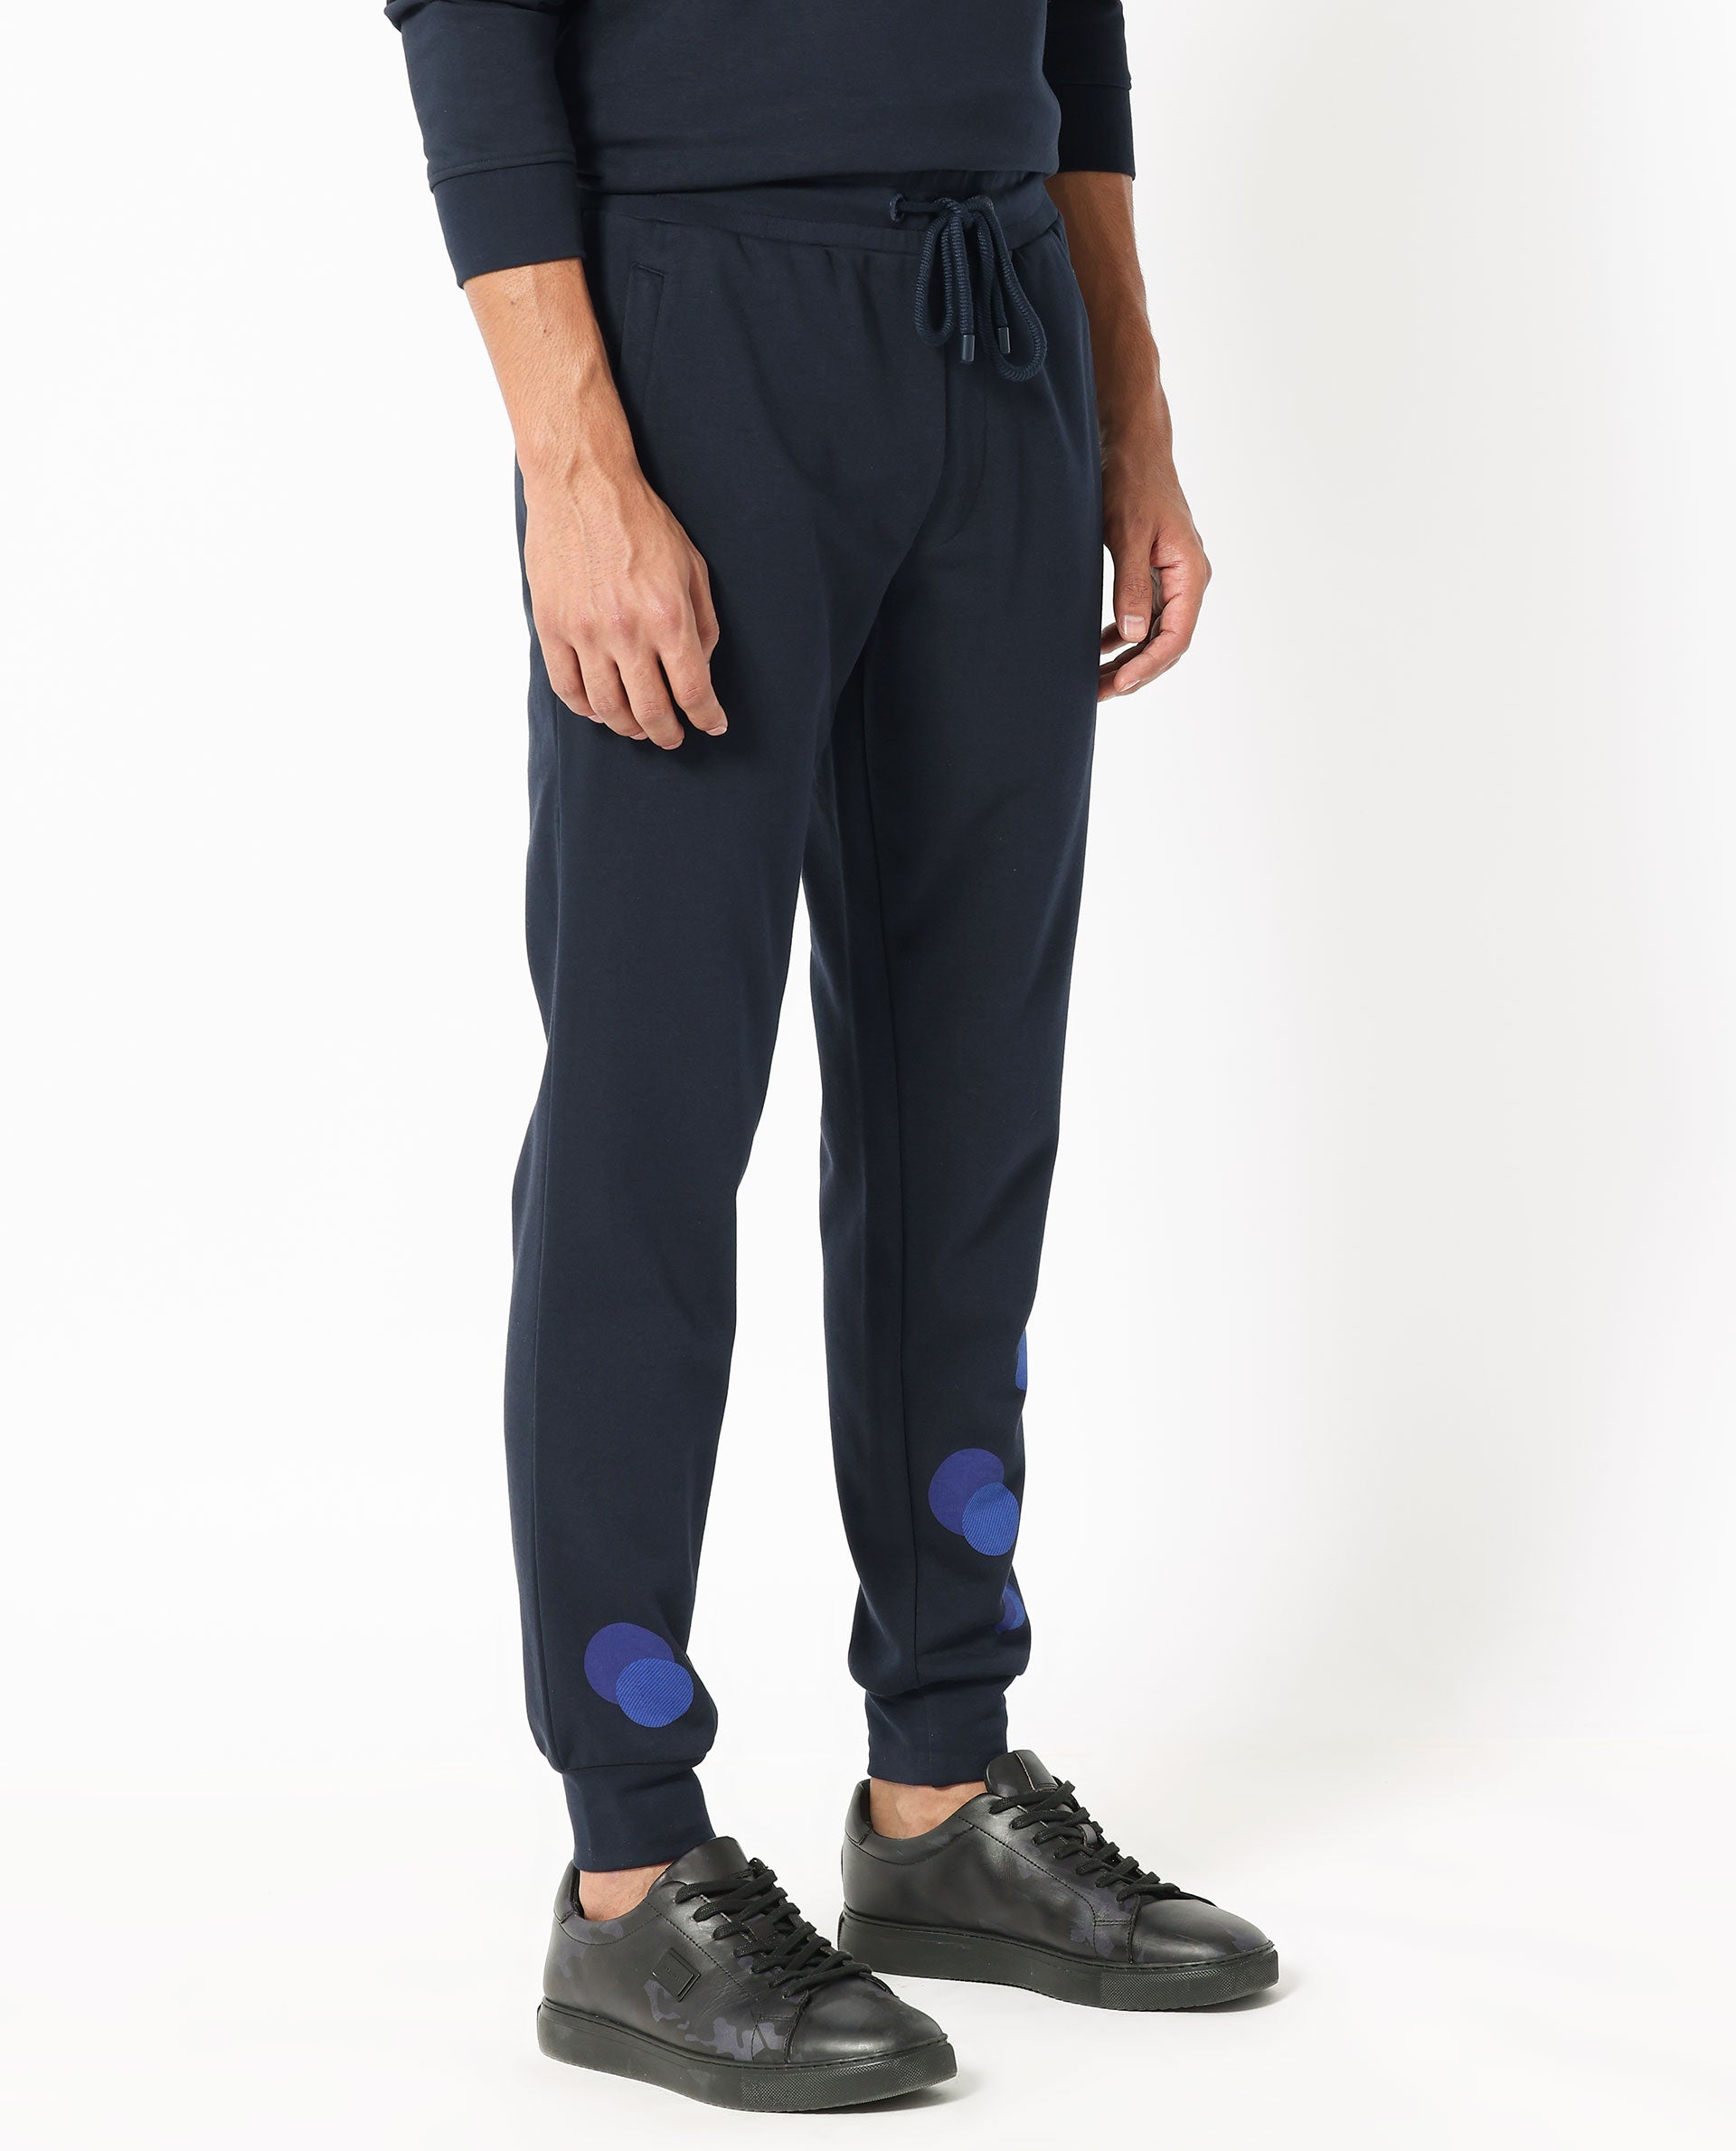 WoW Performance Track Pant AYKN141-1 | Shop online now at Sunlight Station